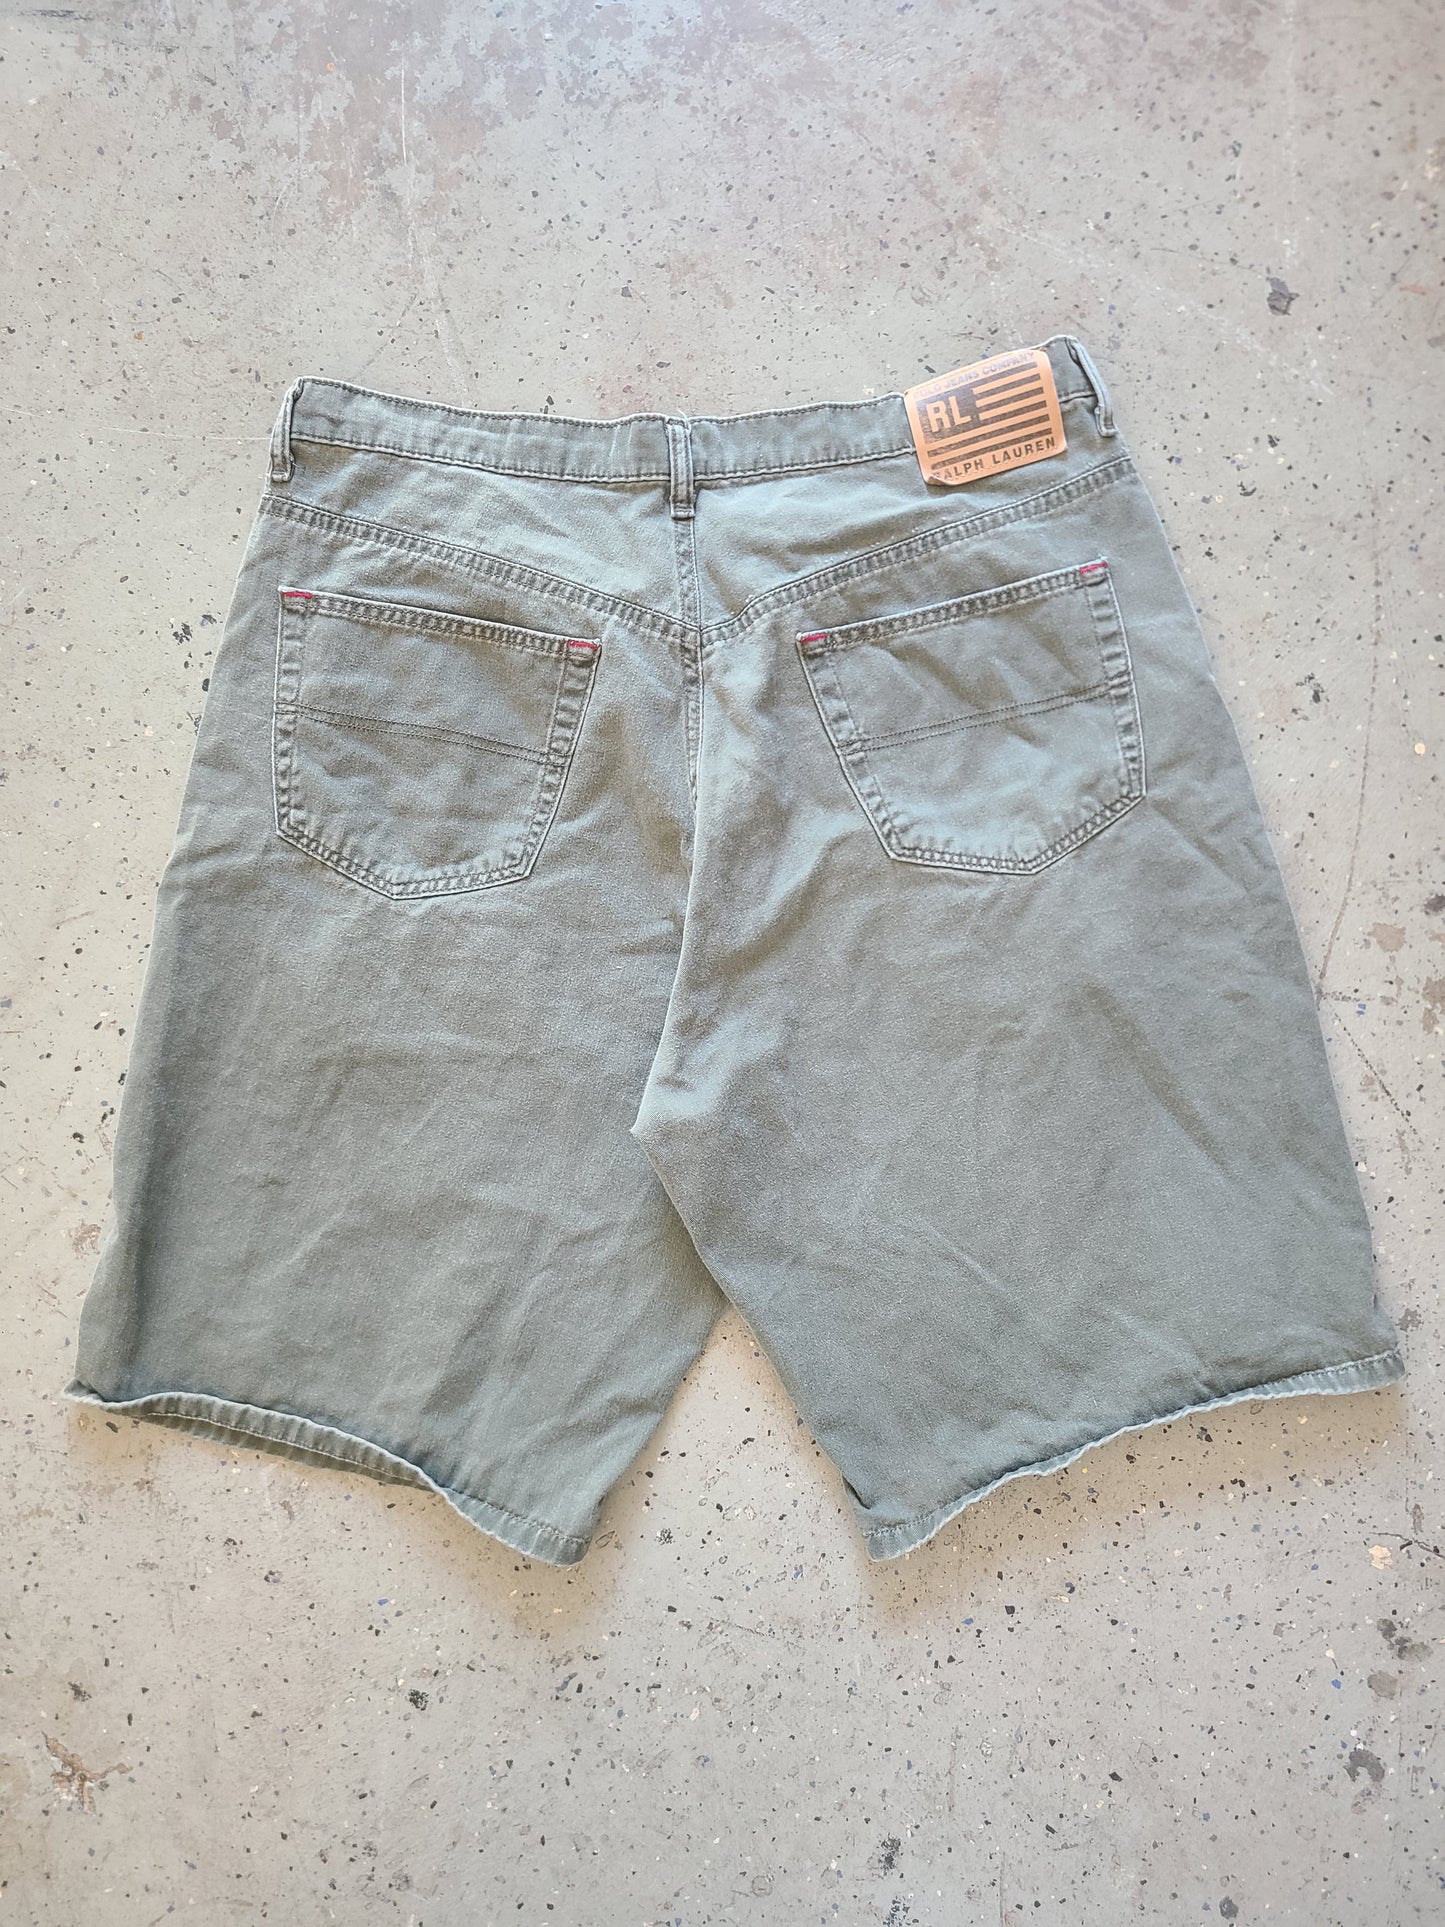 Ralph Lauren Polo Jeans Company Banner Twill Short Size 36